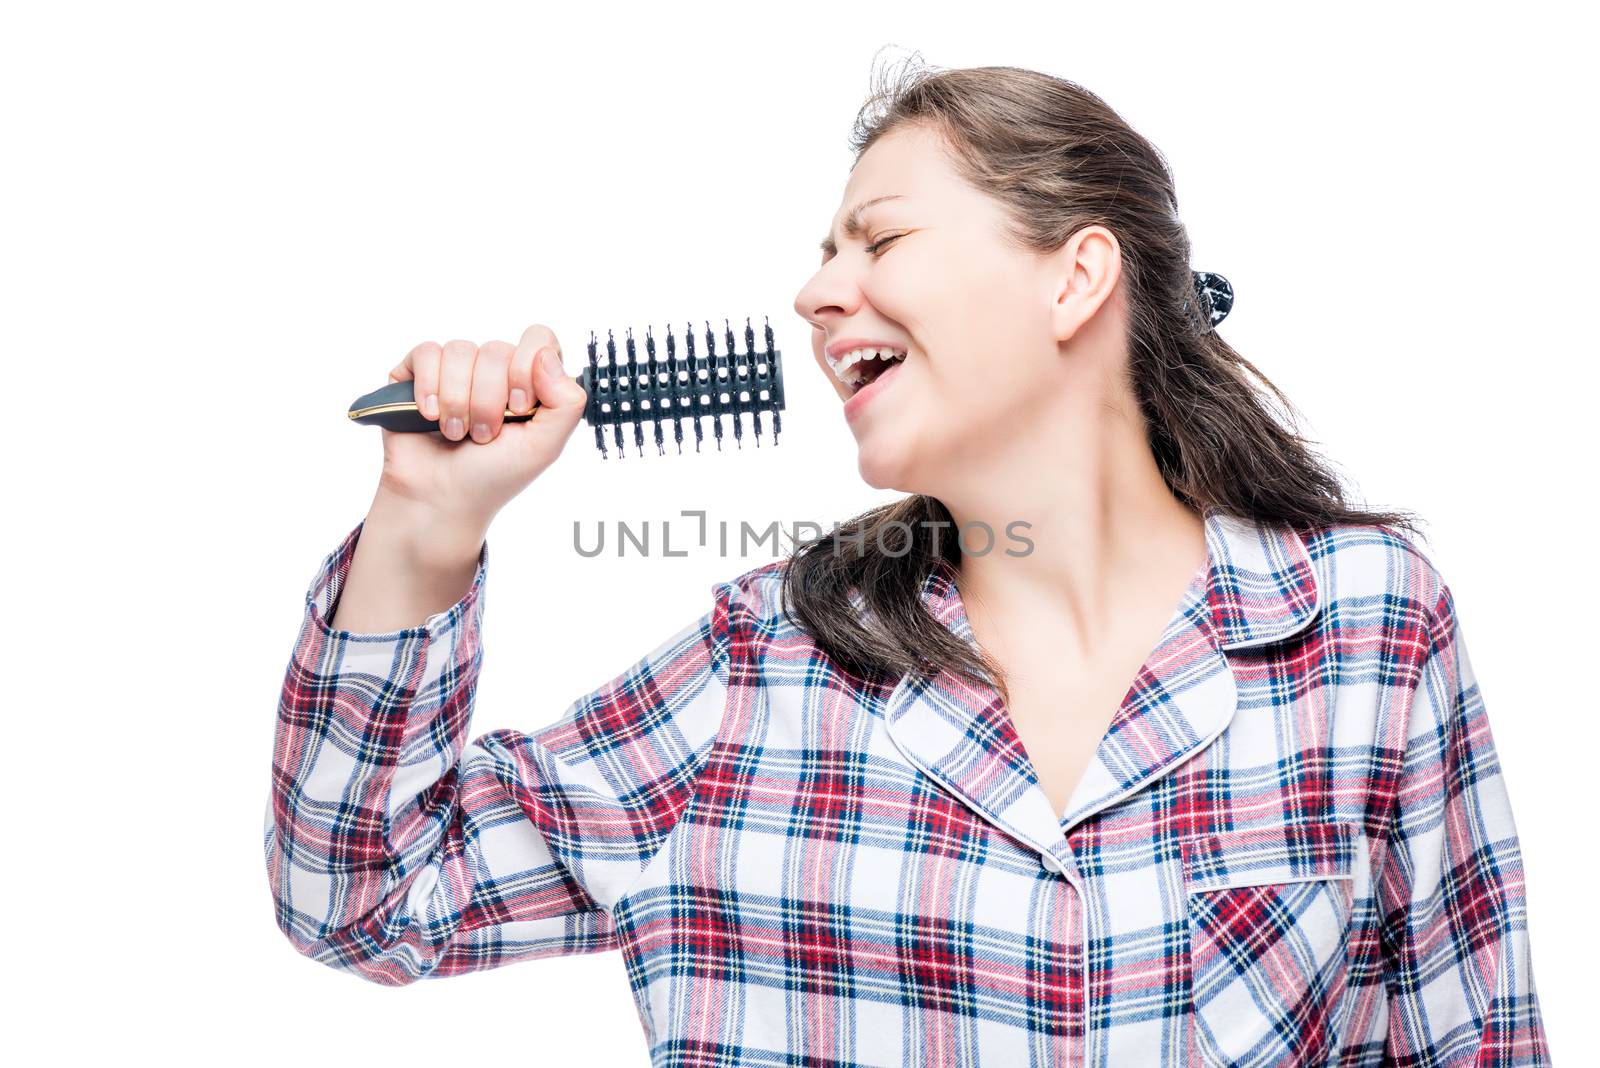 Woman in pajamas singing in hairbrush before going to bed on white background